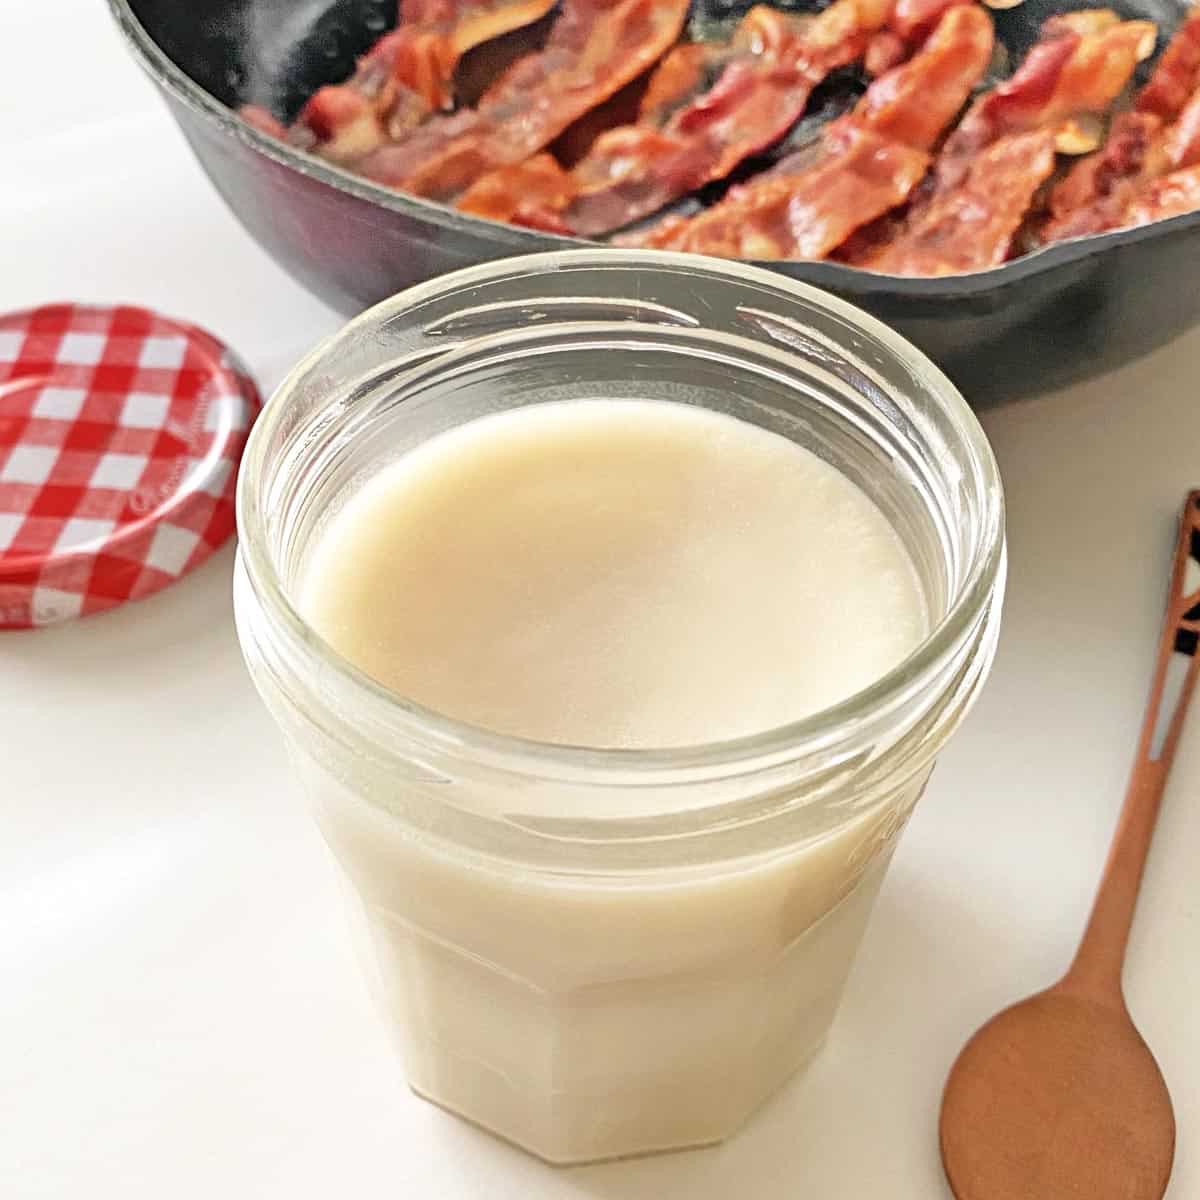 20 Ways to Use Bacon Grease - What to Cook with Bacon Grease